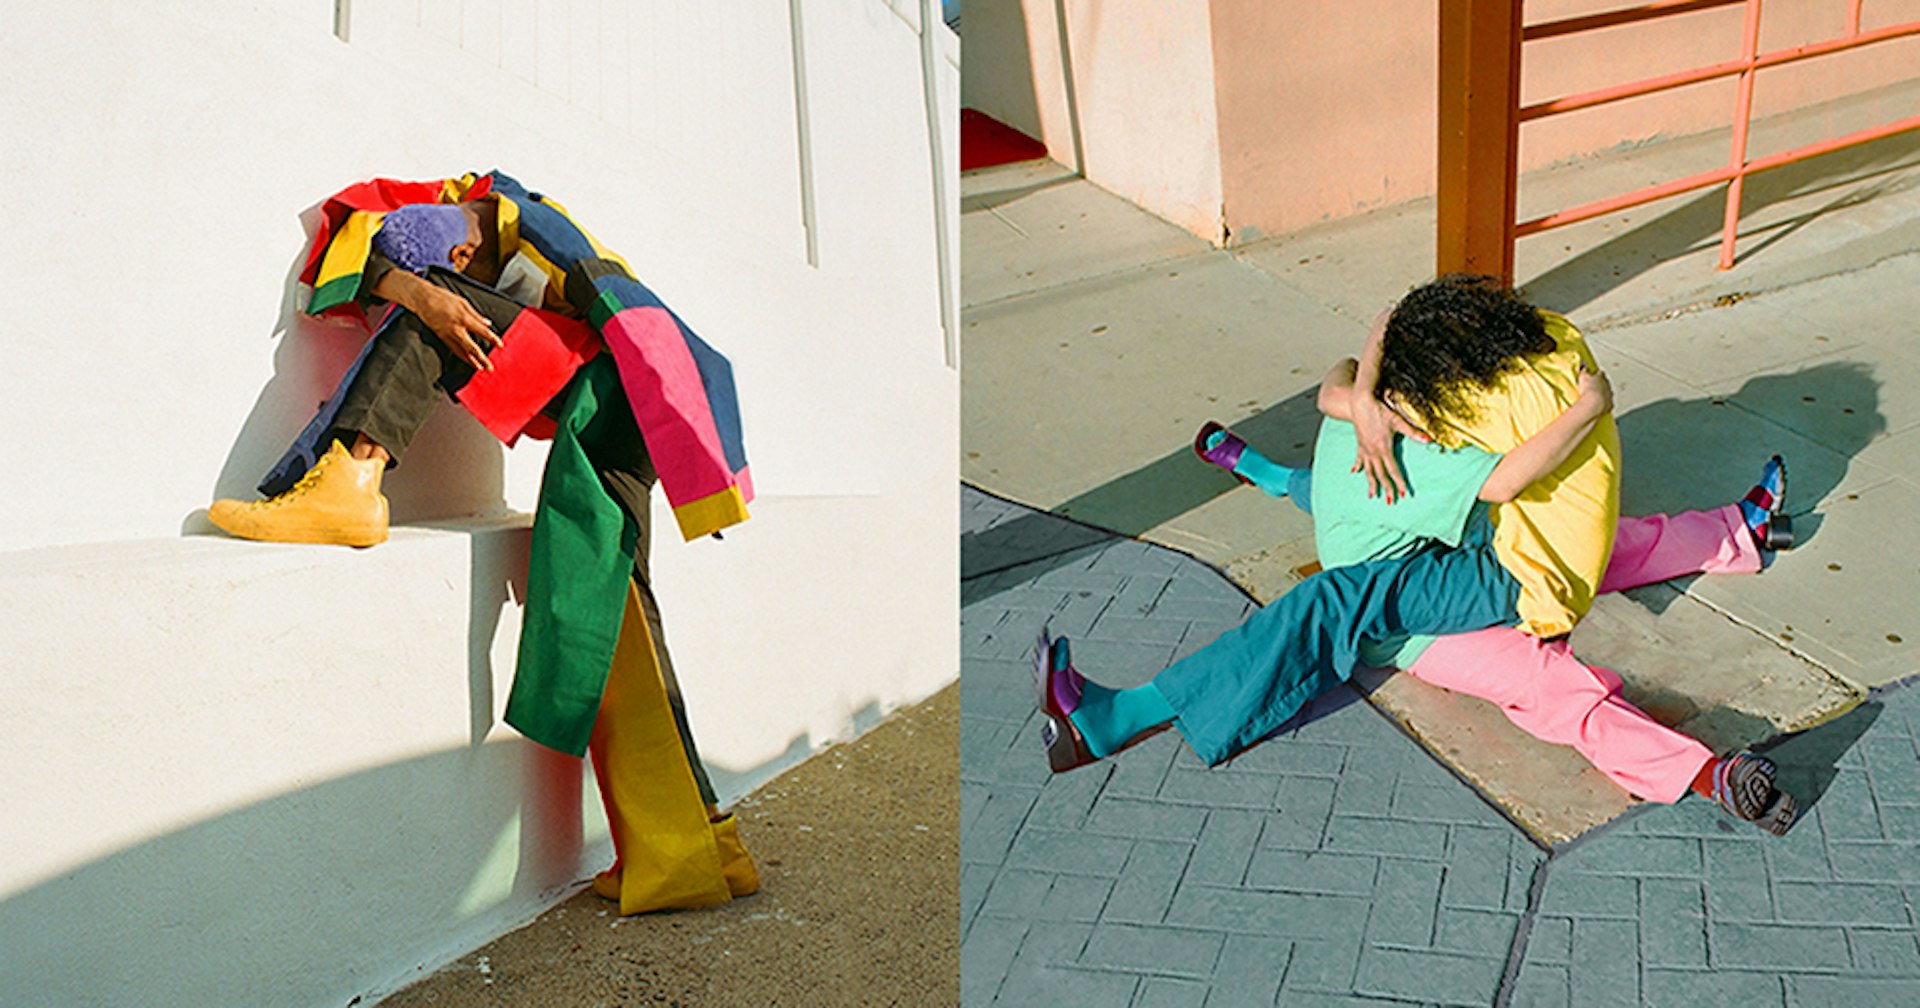 The unapologetic style of a body bending photographer